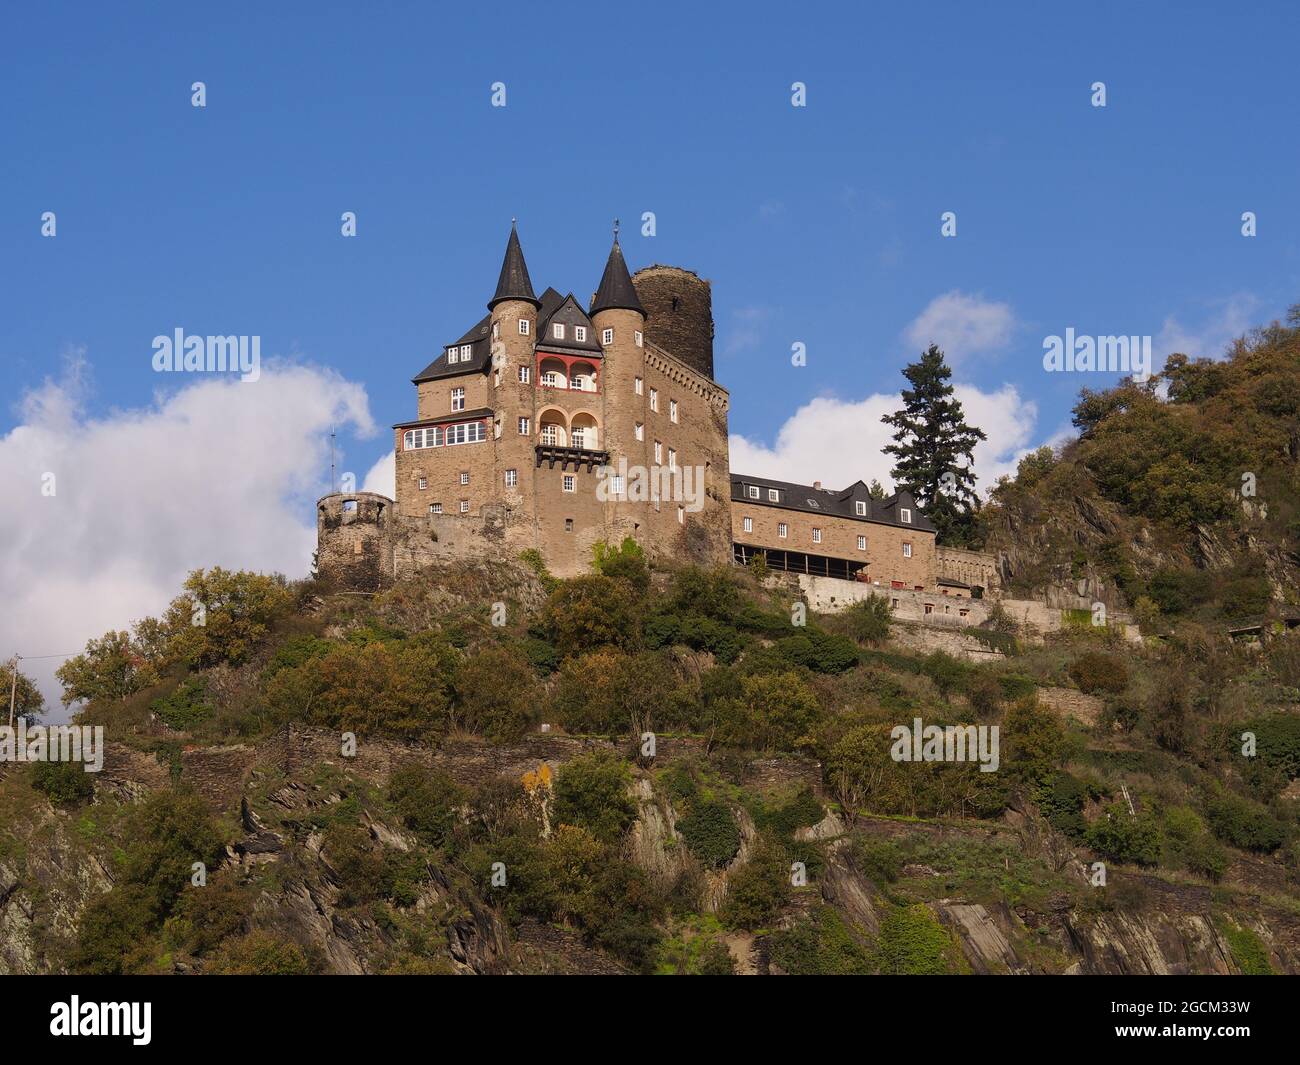 Katz Castle overlooking the town of St. Goarshausen on the River Rhine in Germany Stock Photo